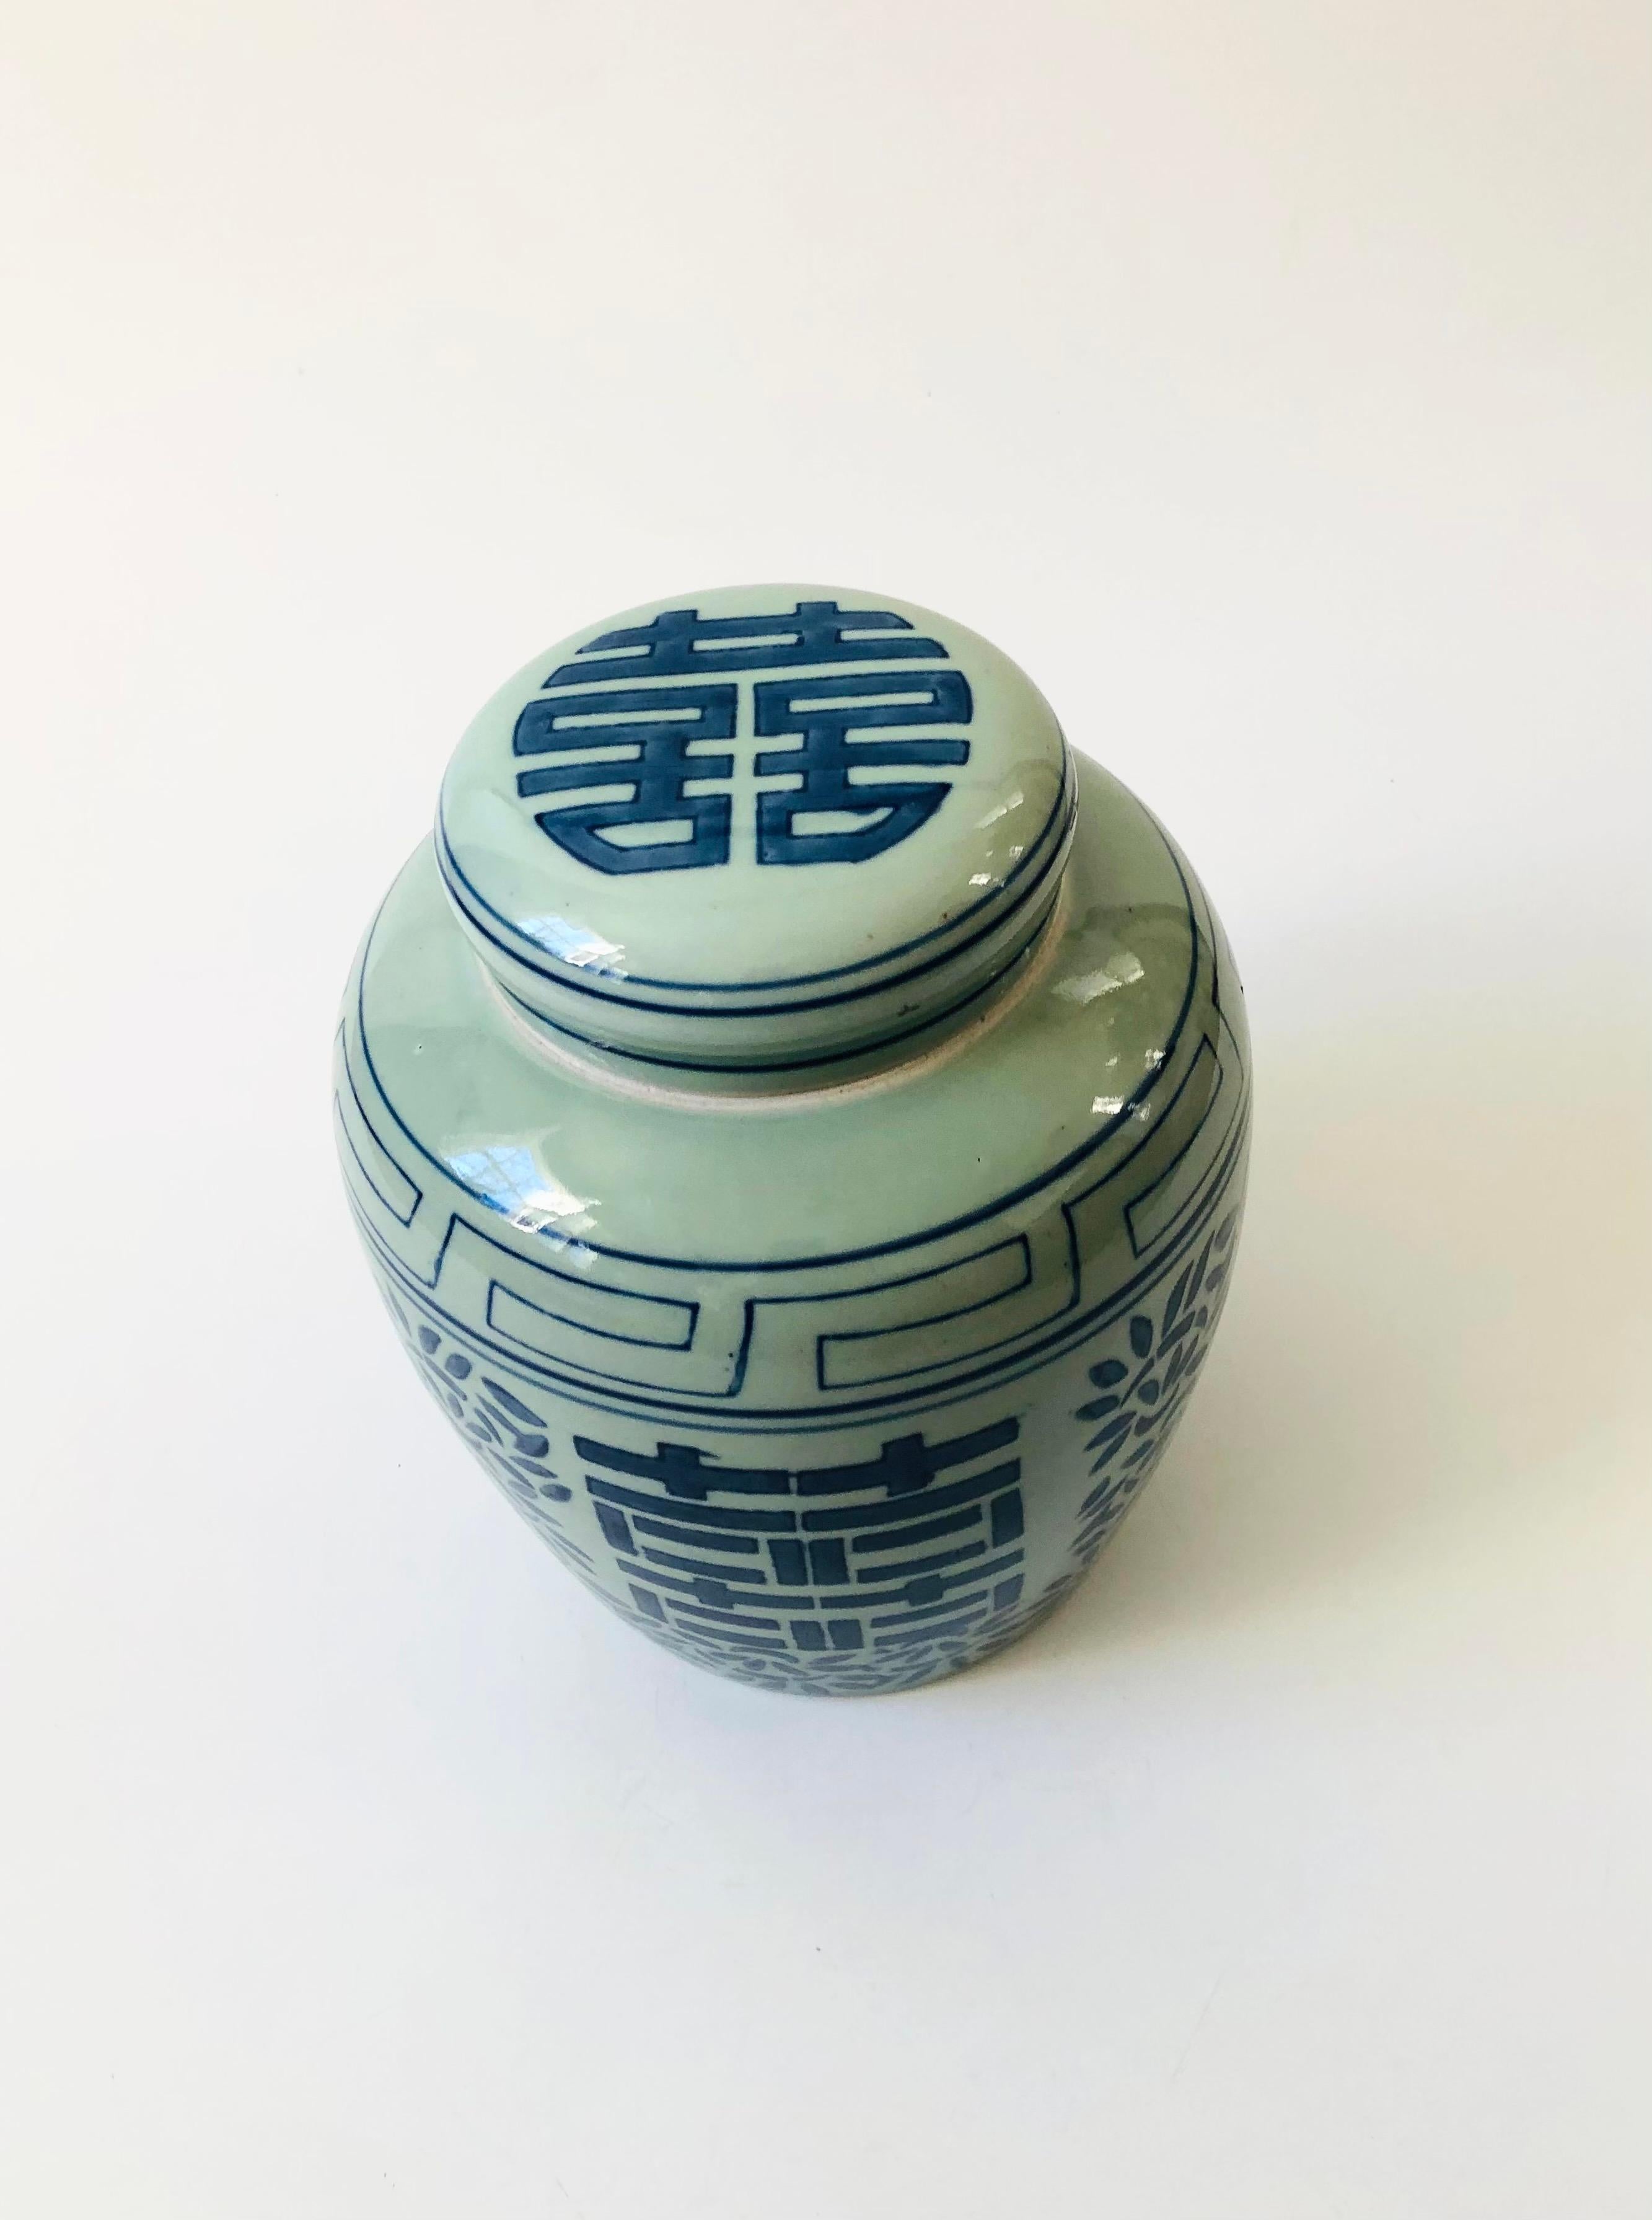 A vintage ceramic Chinese double happiness ginger jar. Beautiful hand painted details under a glossy glaze. A matching circular lid sits on the top of the jar. Large double happiness characters are painted on 2 sides with floral detailing